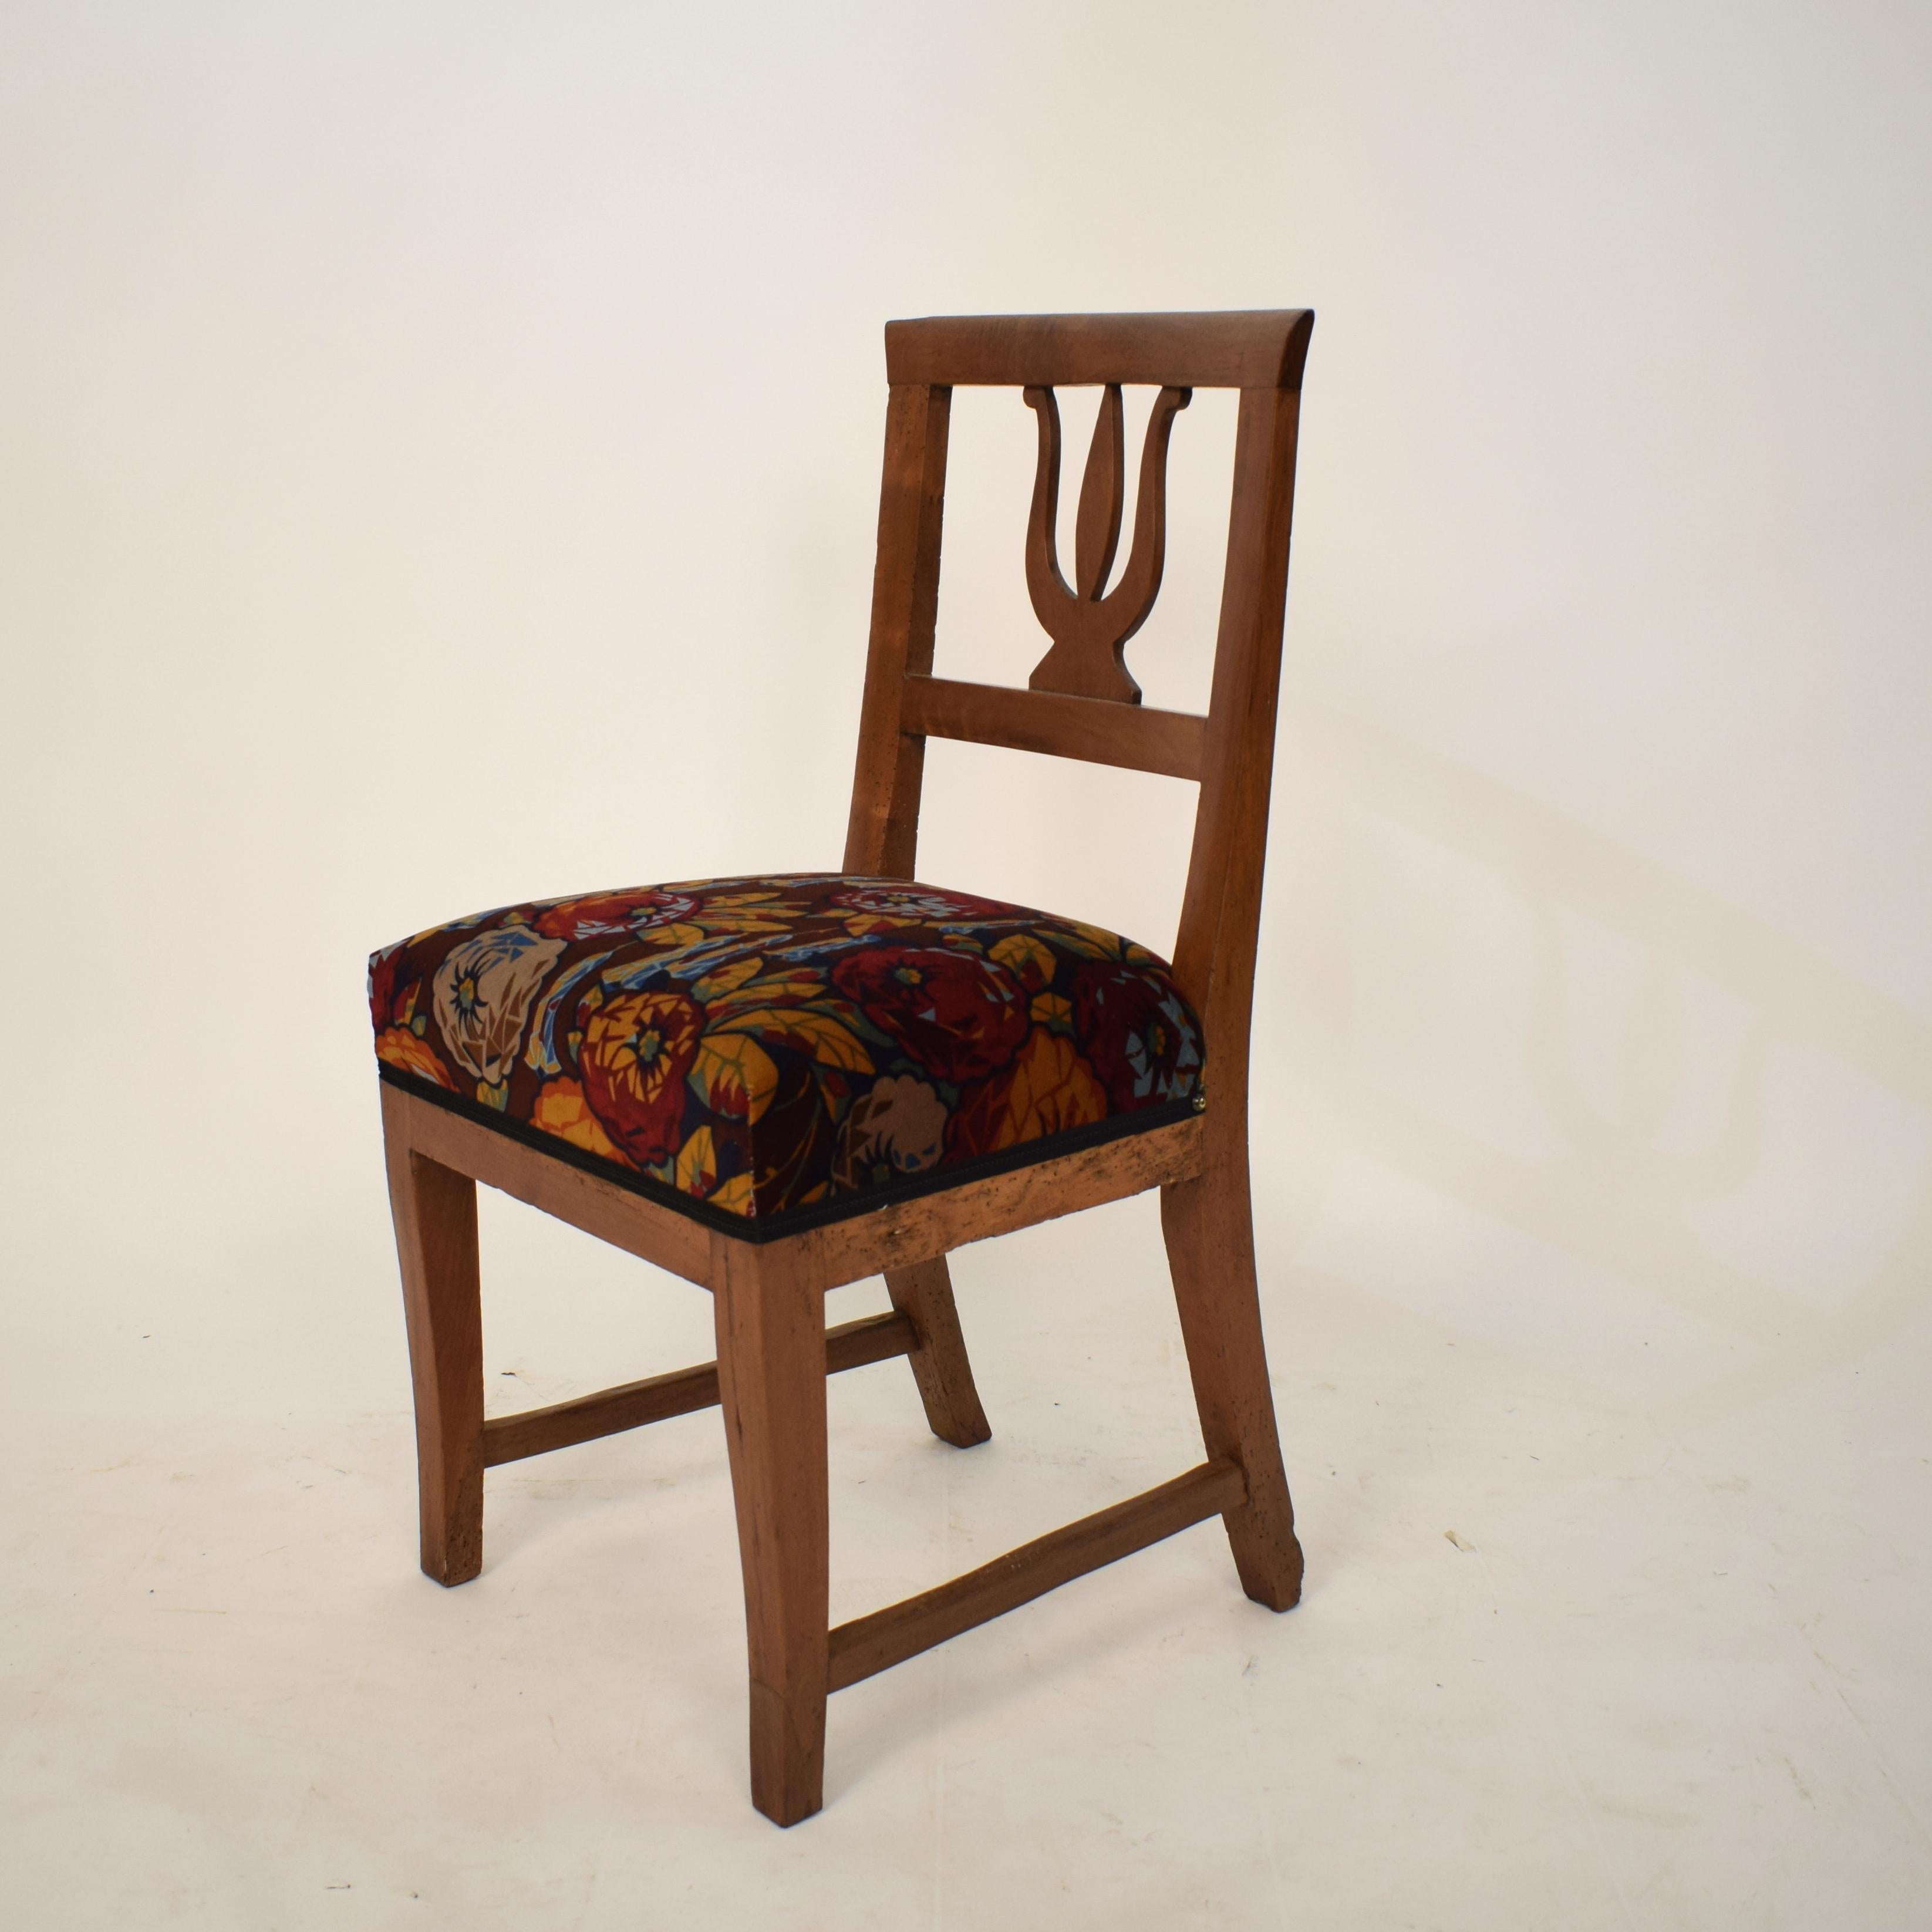 This beautiful 19th century Italian Biedermeier side or dining chair was built in 1820. The chair is made out of brown walnut wood. 
It is newly upholstered in velvet with flower pattern.
A unique piece which is a great eyecatcher for your